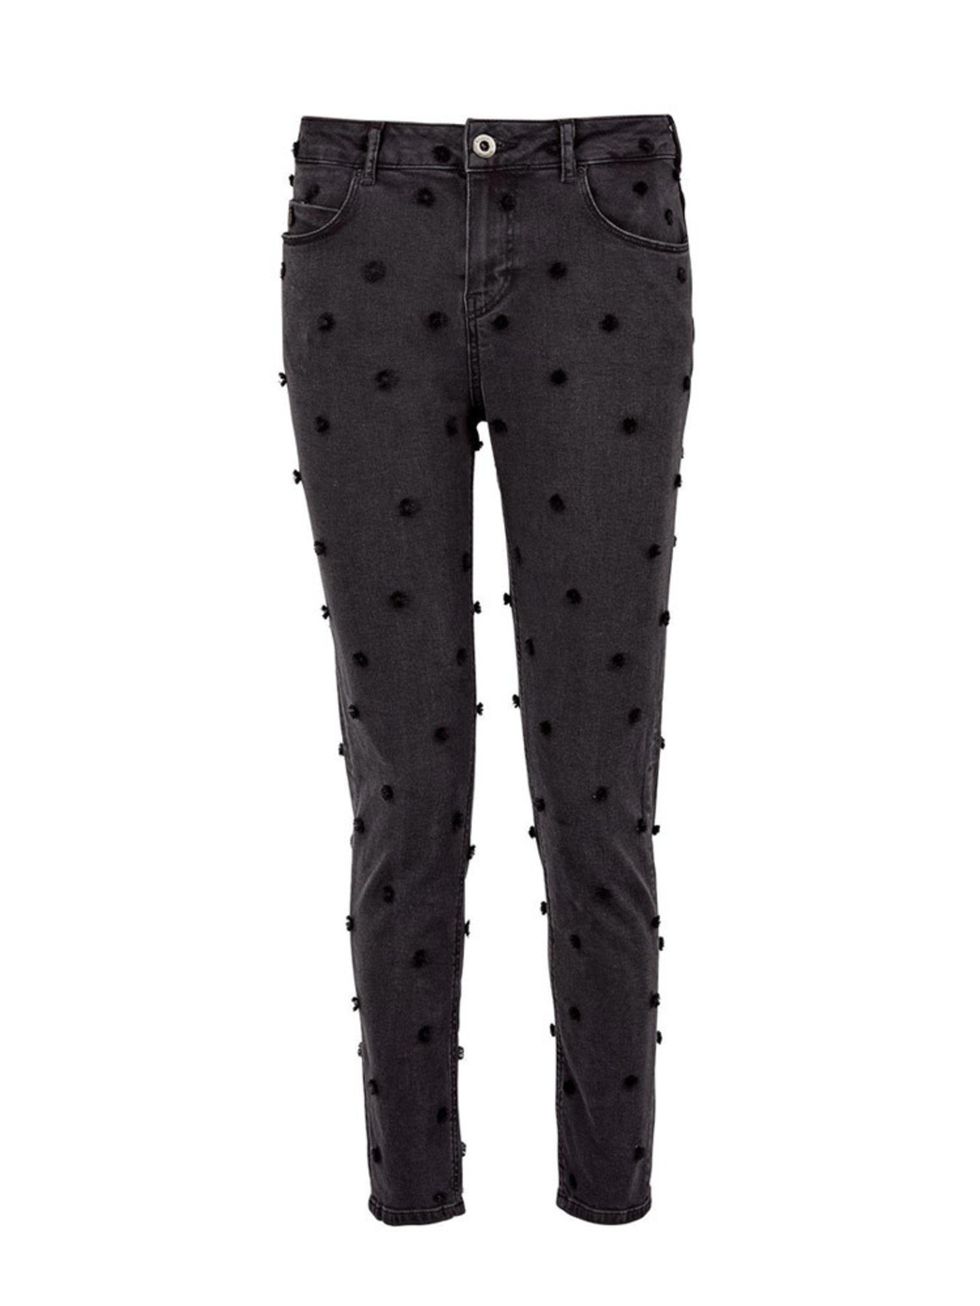 <p>Scotch and Soda Jeans, £150 at <a href="http://www.veryexclusive.co.uk/maison-scotch-embellished-polka-dot-jeans-black/1600047555.prd" target="_blank">veryexclusive.co.uk</a></p>

<p>Day: add a slouchy <a href="http://www.veryexclusive.co.uk/t-by-alexa